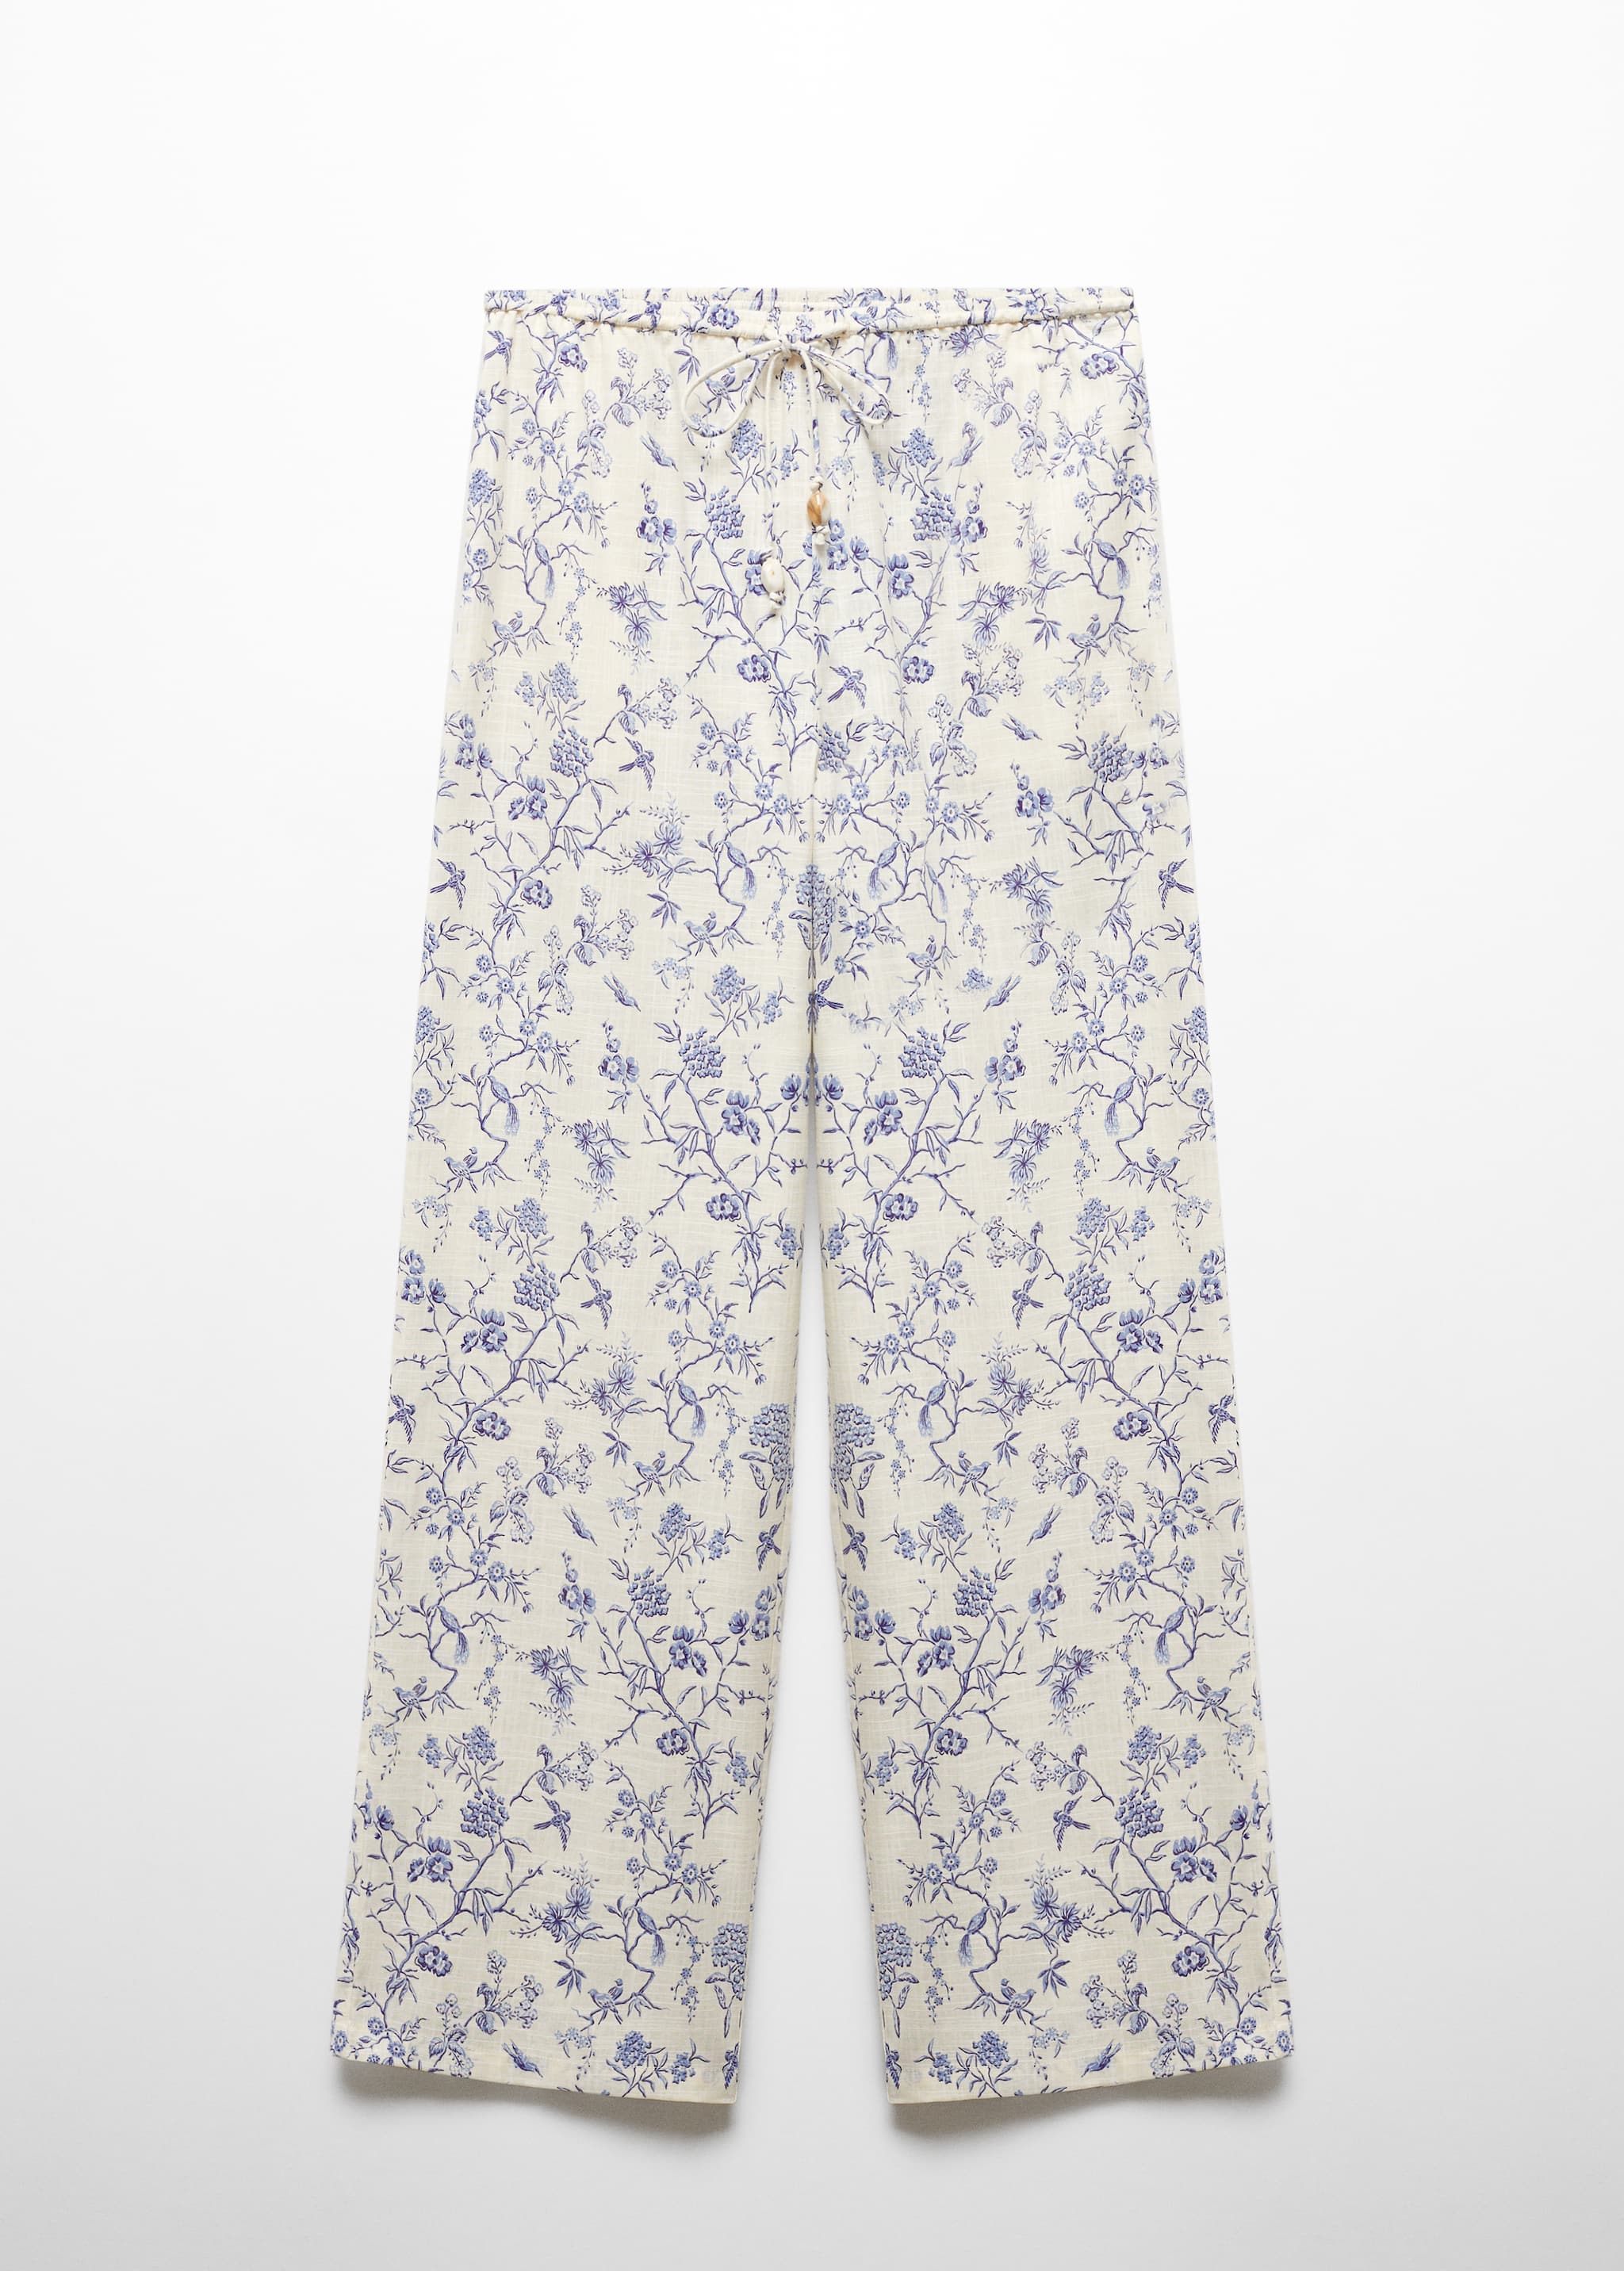 Printed cotton trousers - Article without model